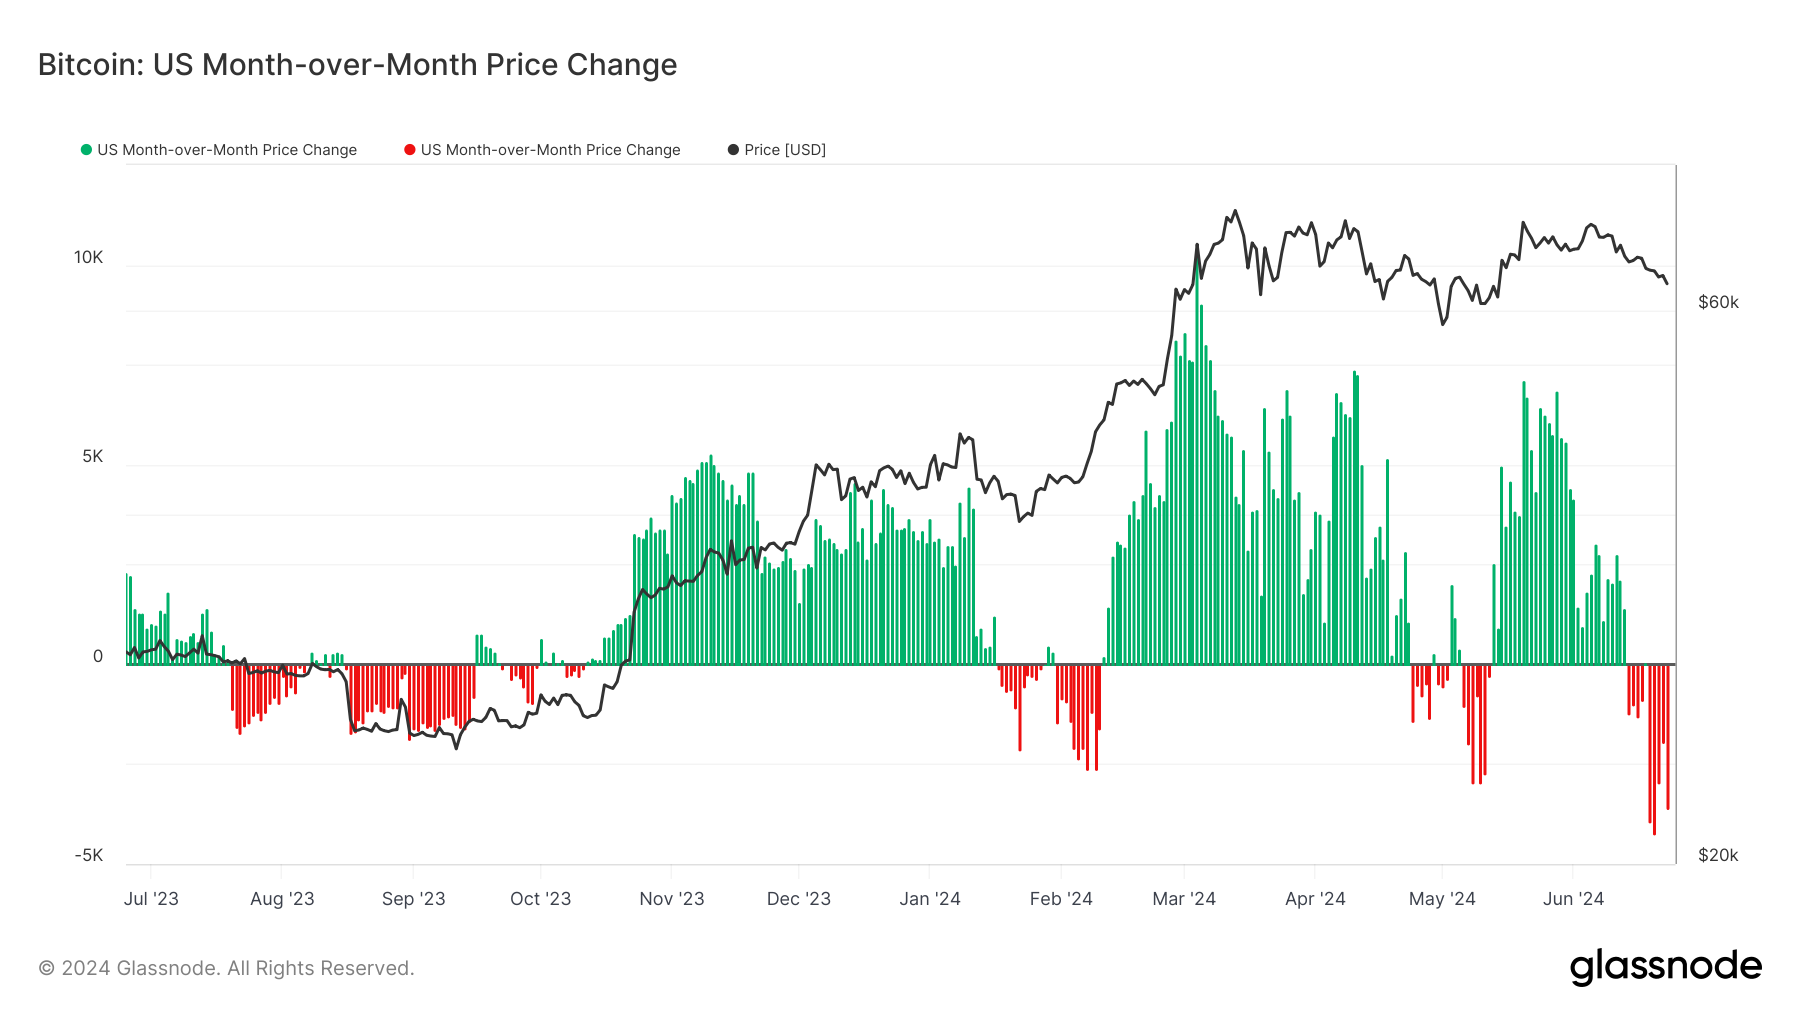 Bitcoin: US Month - over - Month Price Change: (Source: Glassnode)